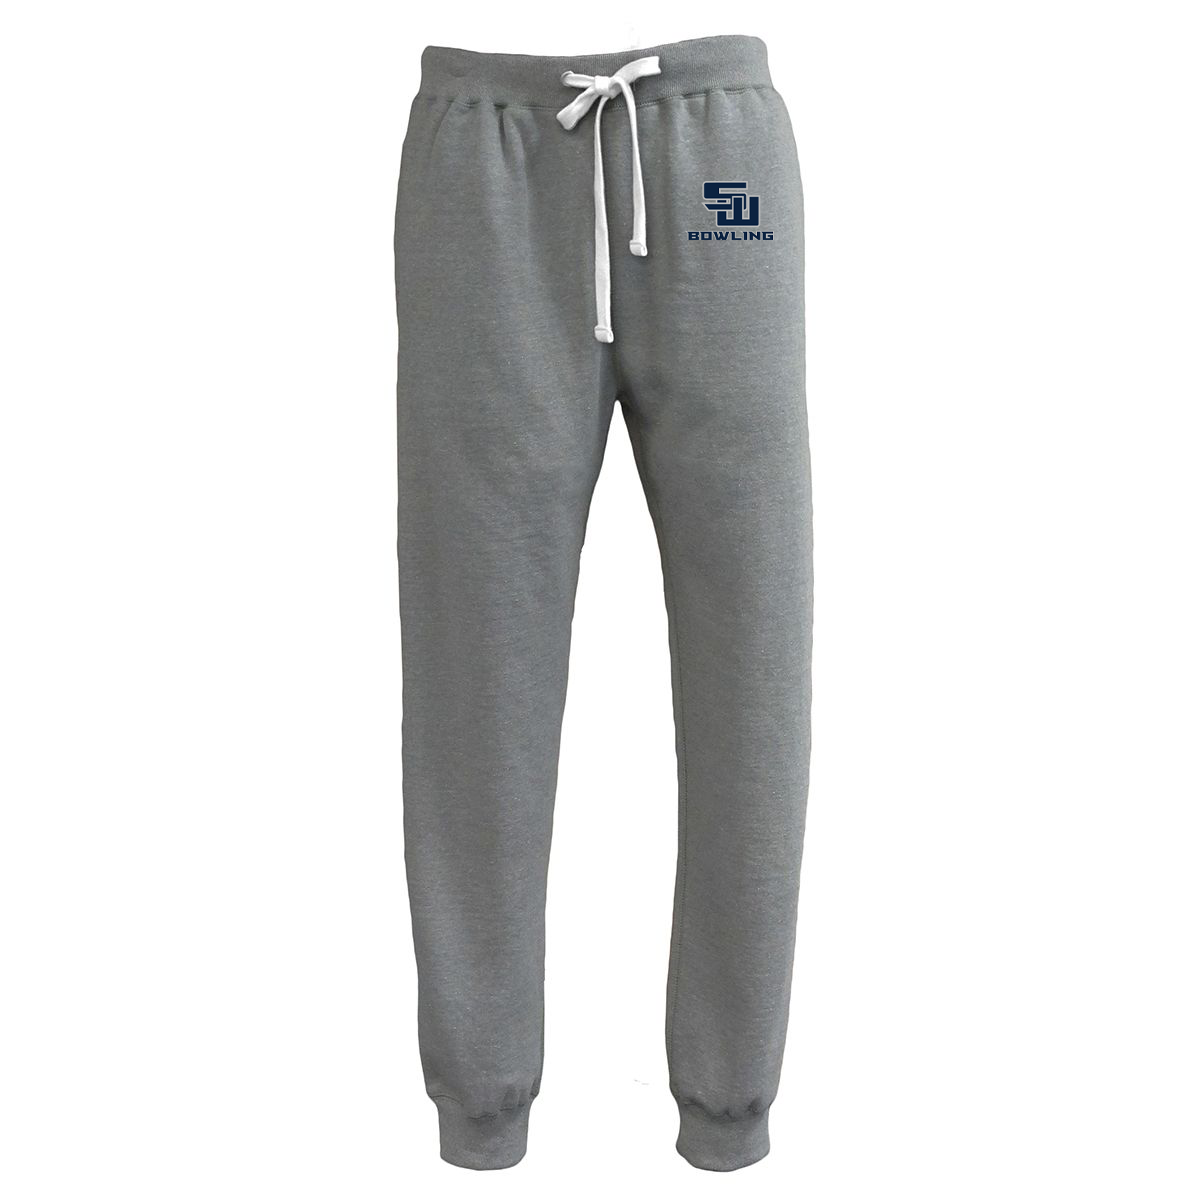 Smithtown West Bowling Joggers